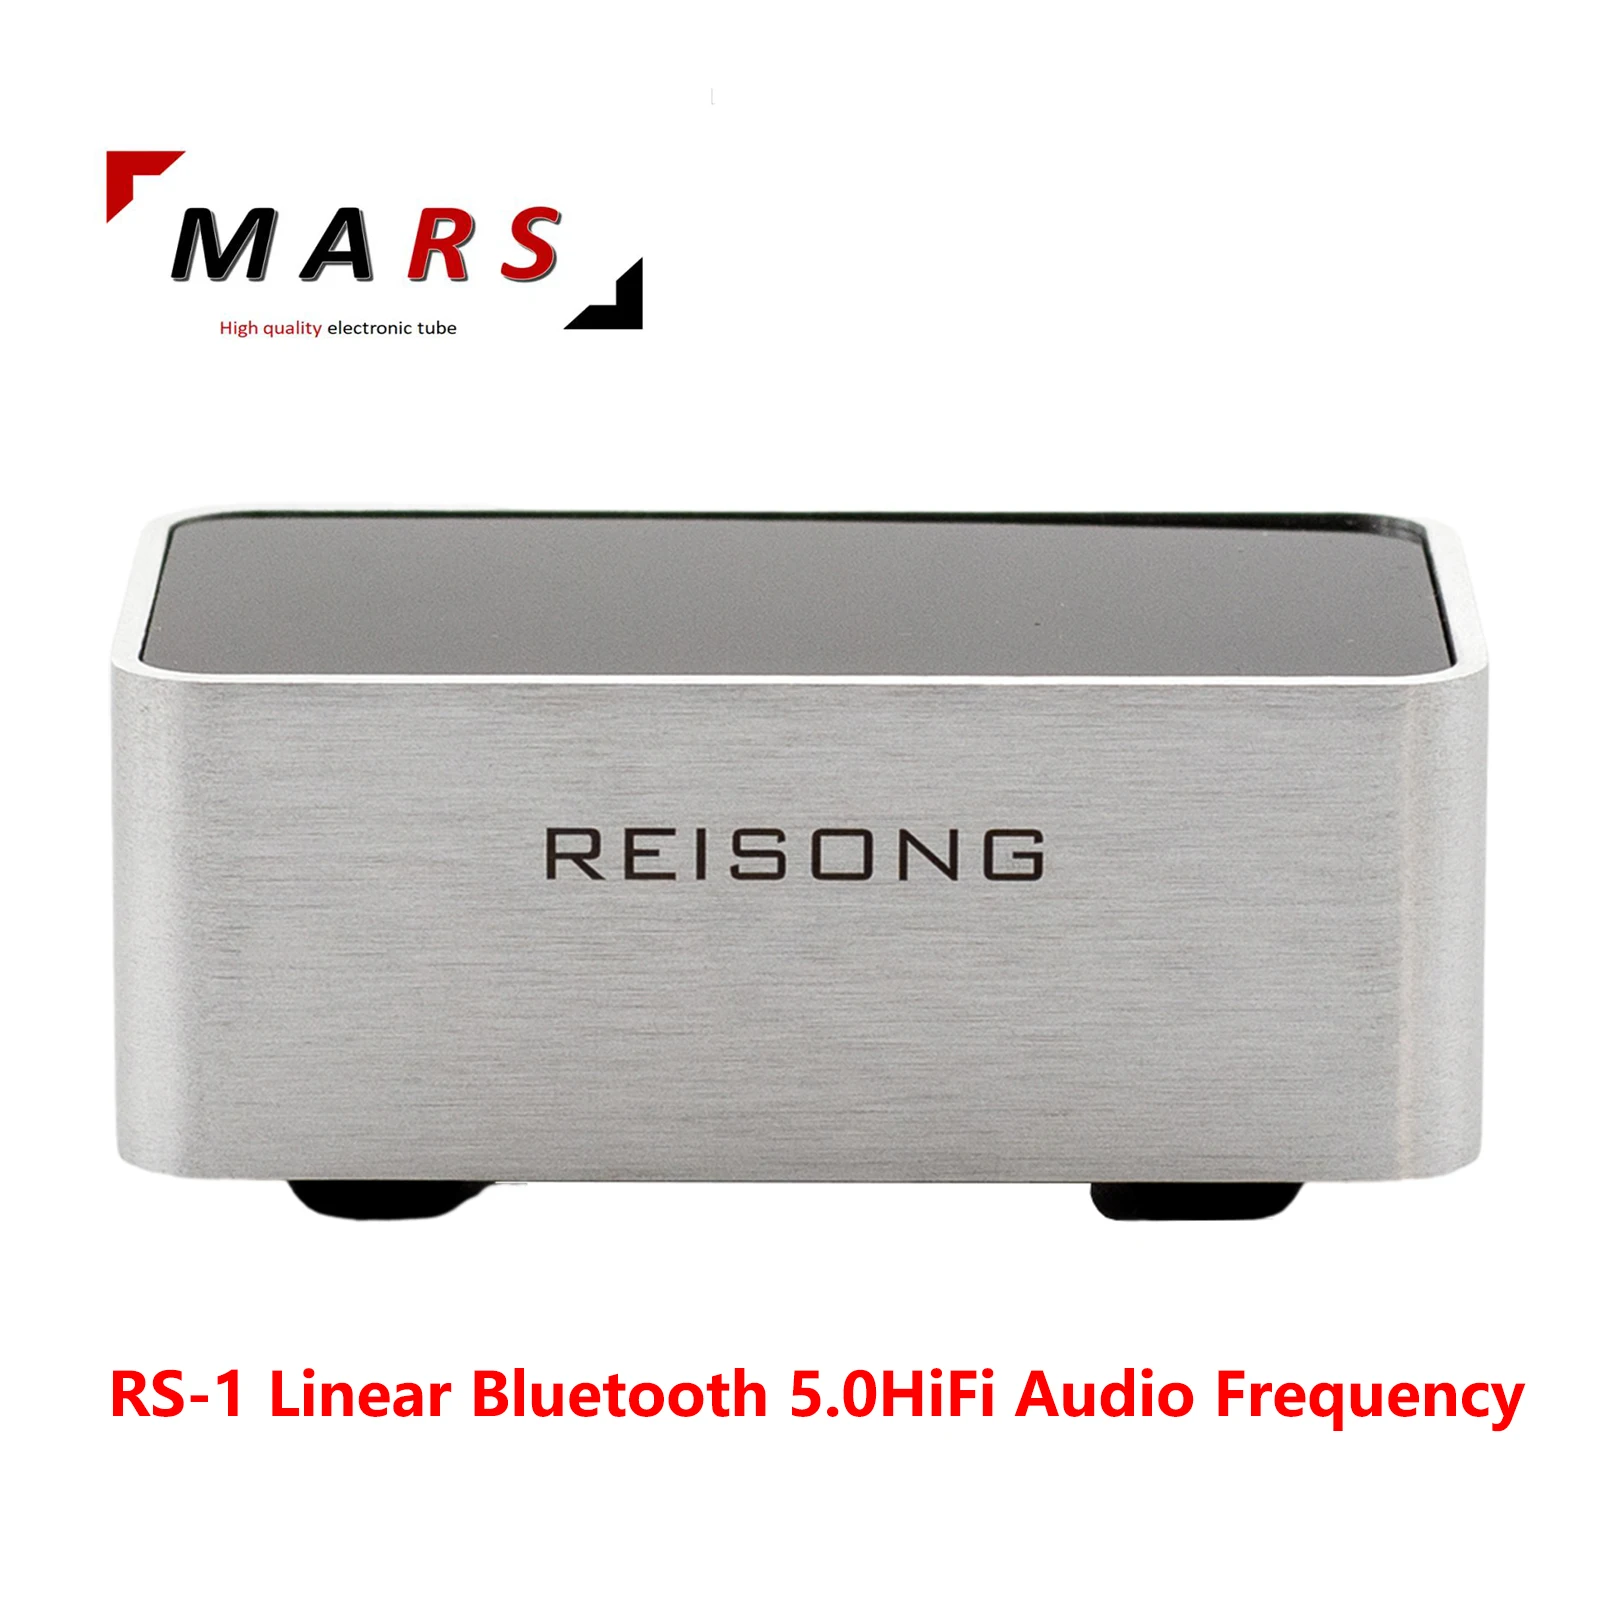 

Mars RS-1 linear bluetooth 5.0HiFi audio frequency converter cow output aptX-HD lossless sound quality transmission audio 2023 l